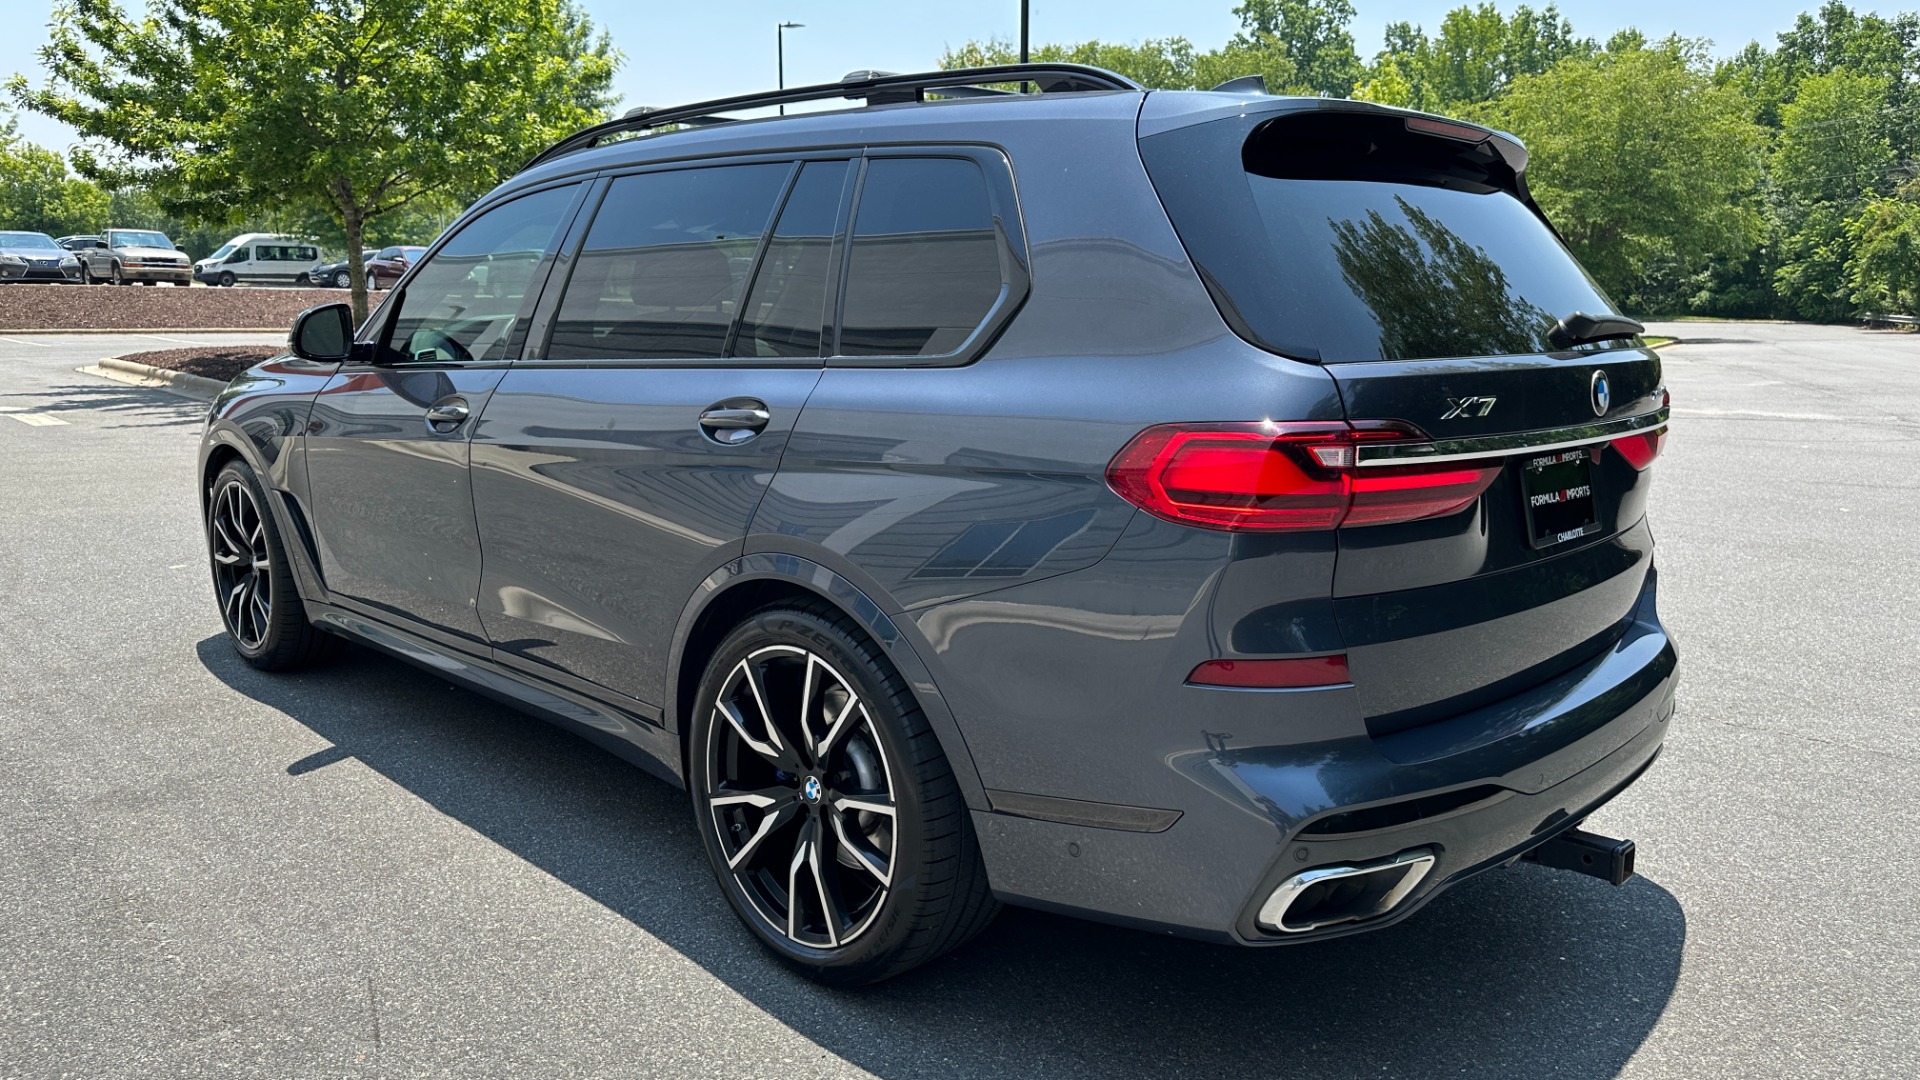 Used 2019 BMW X7 xDrive50i / EXECUTIVE / M SPORT / EXECUTIVE / DYNAMIC HANDLING / LEATHER for sale $53,800 at Formula Imports in Charlotte NC 28227 4